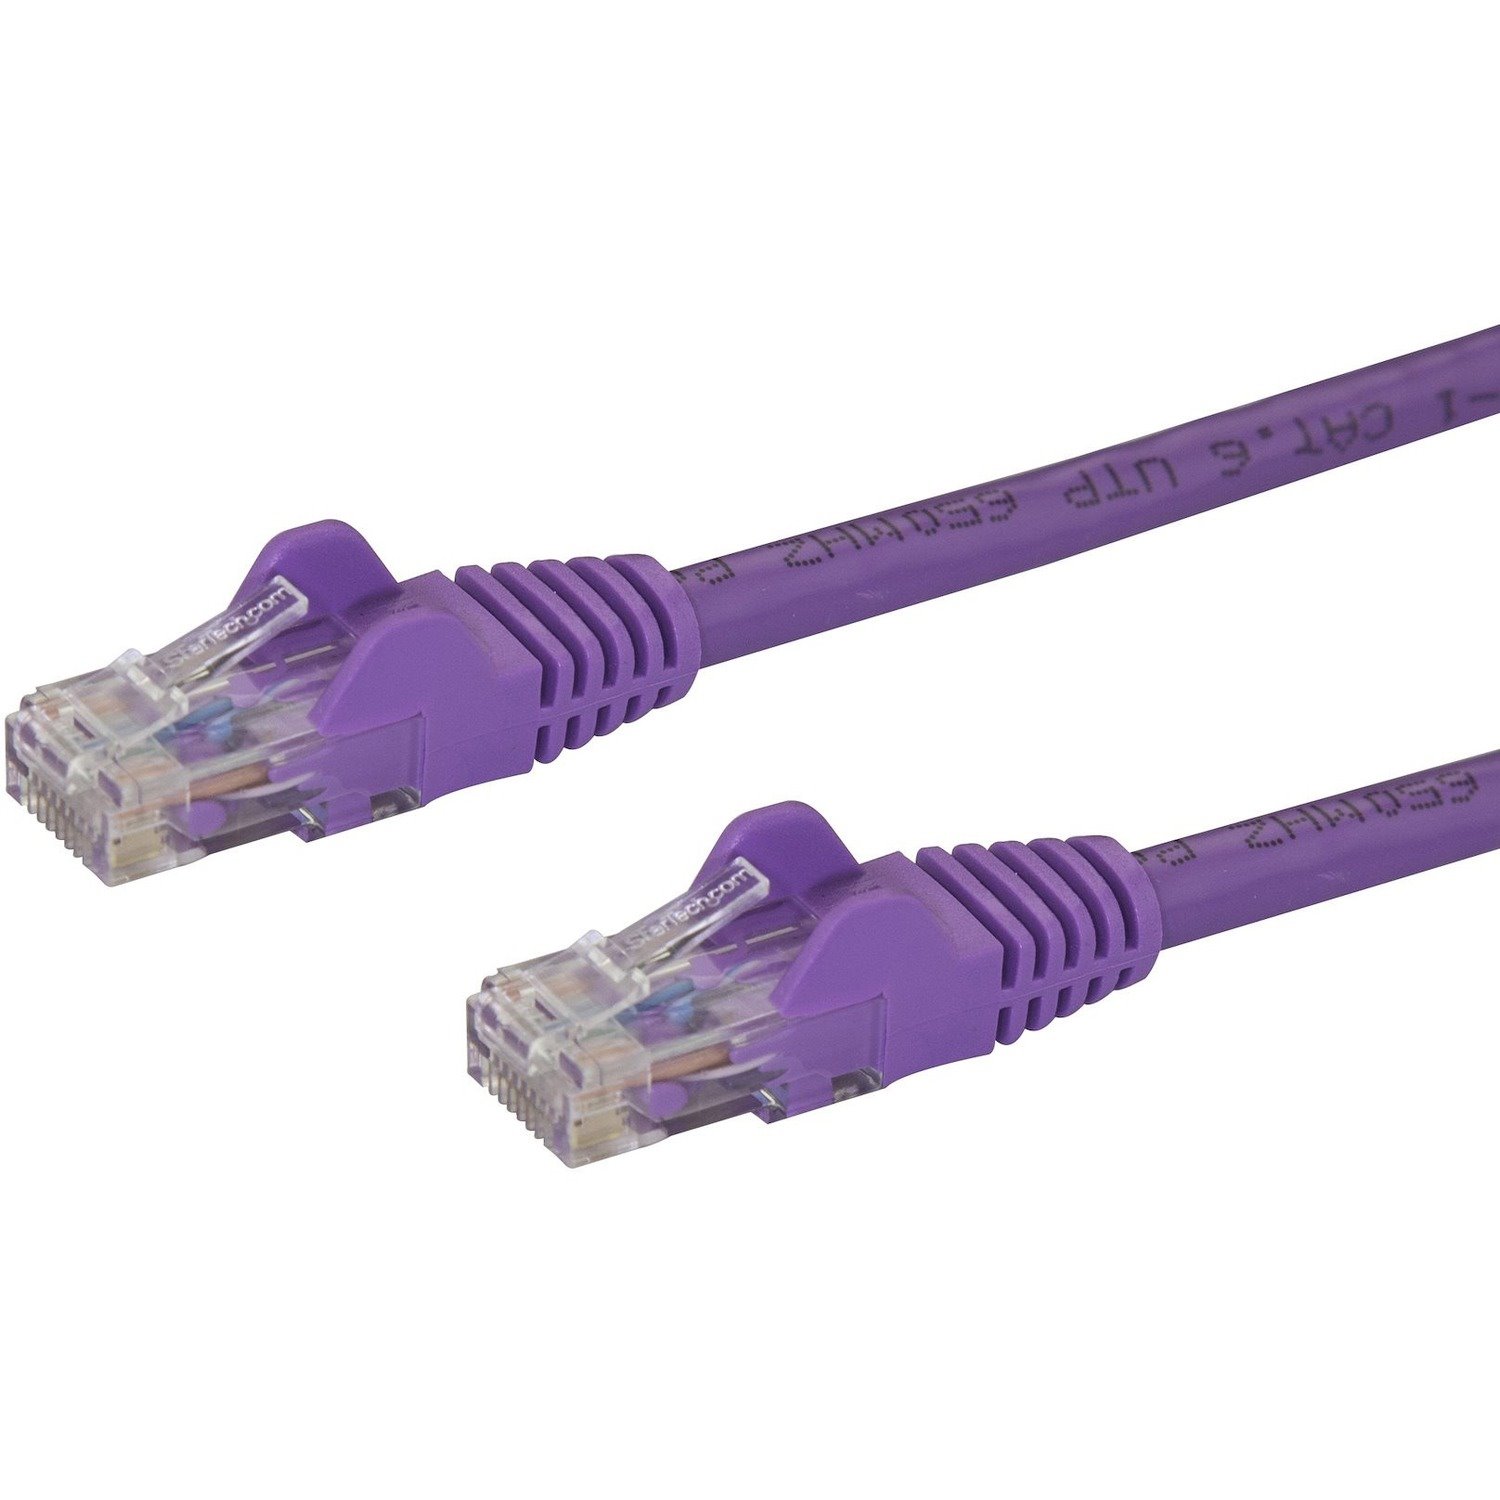 StarTech.com 10 m Category 6 Network Cable for Network Device, Hub, Distribution Panel, Wall Outlet, Workstation, IP Phone - 1